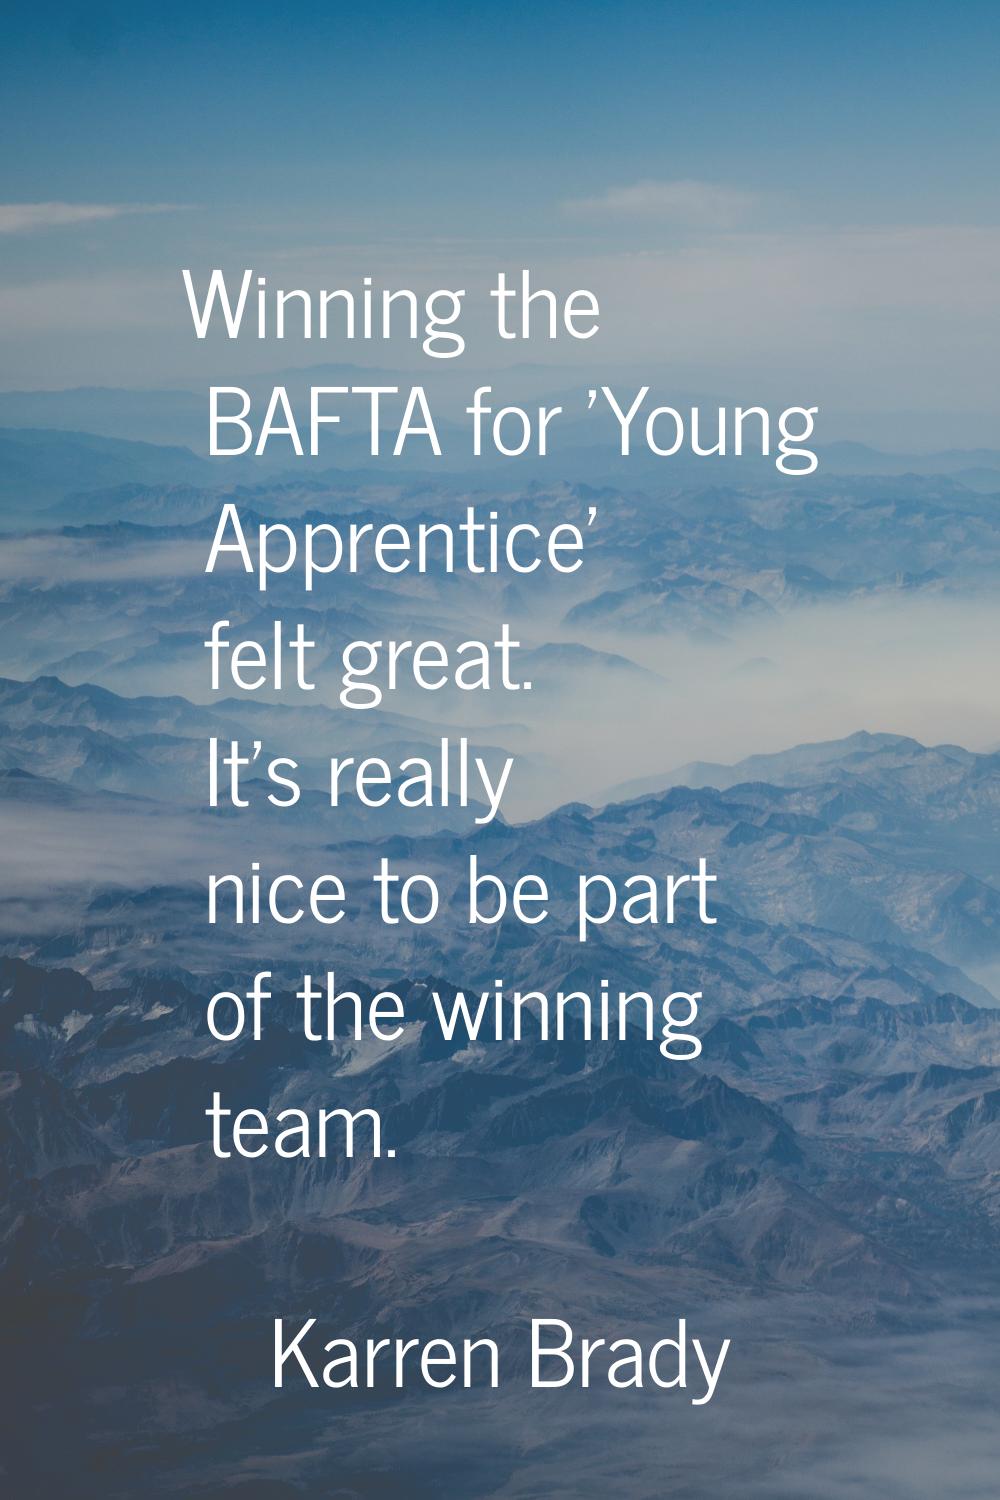 Winning the BAFTA for 'Young Apprentice' felt great. It's really nice to be part of the winning tea